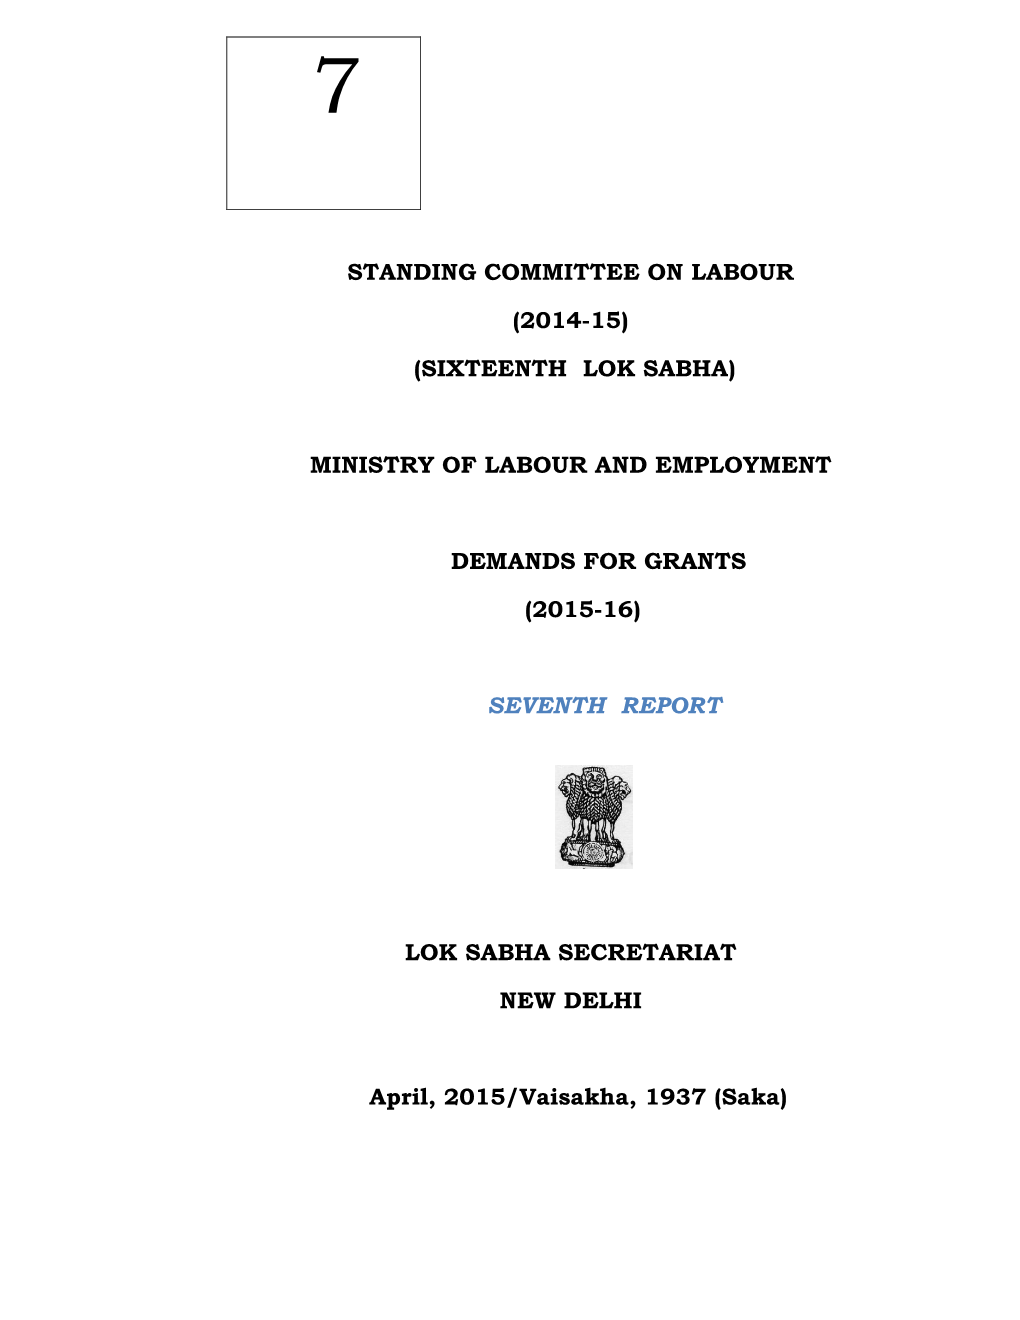 Standing Committee on Labour (2014-15) (Sixteenth